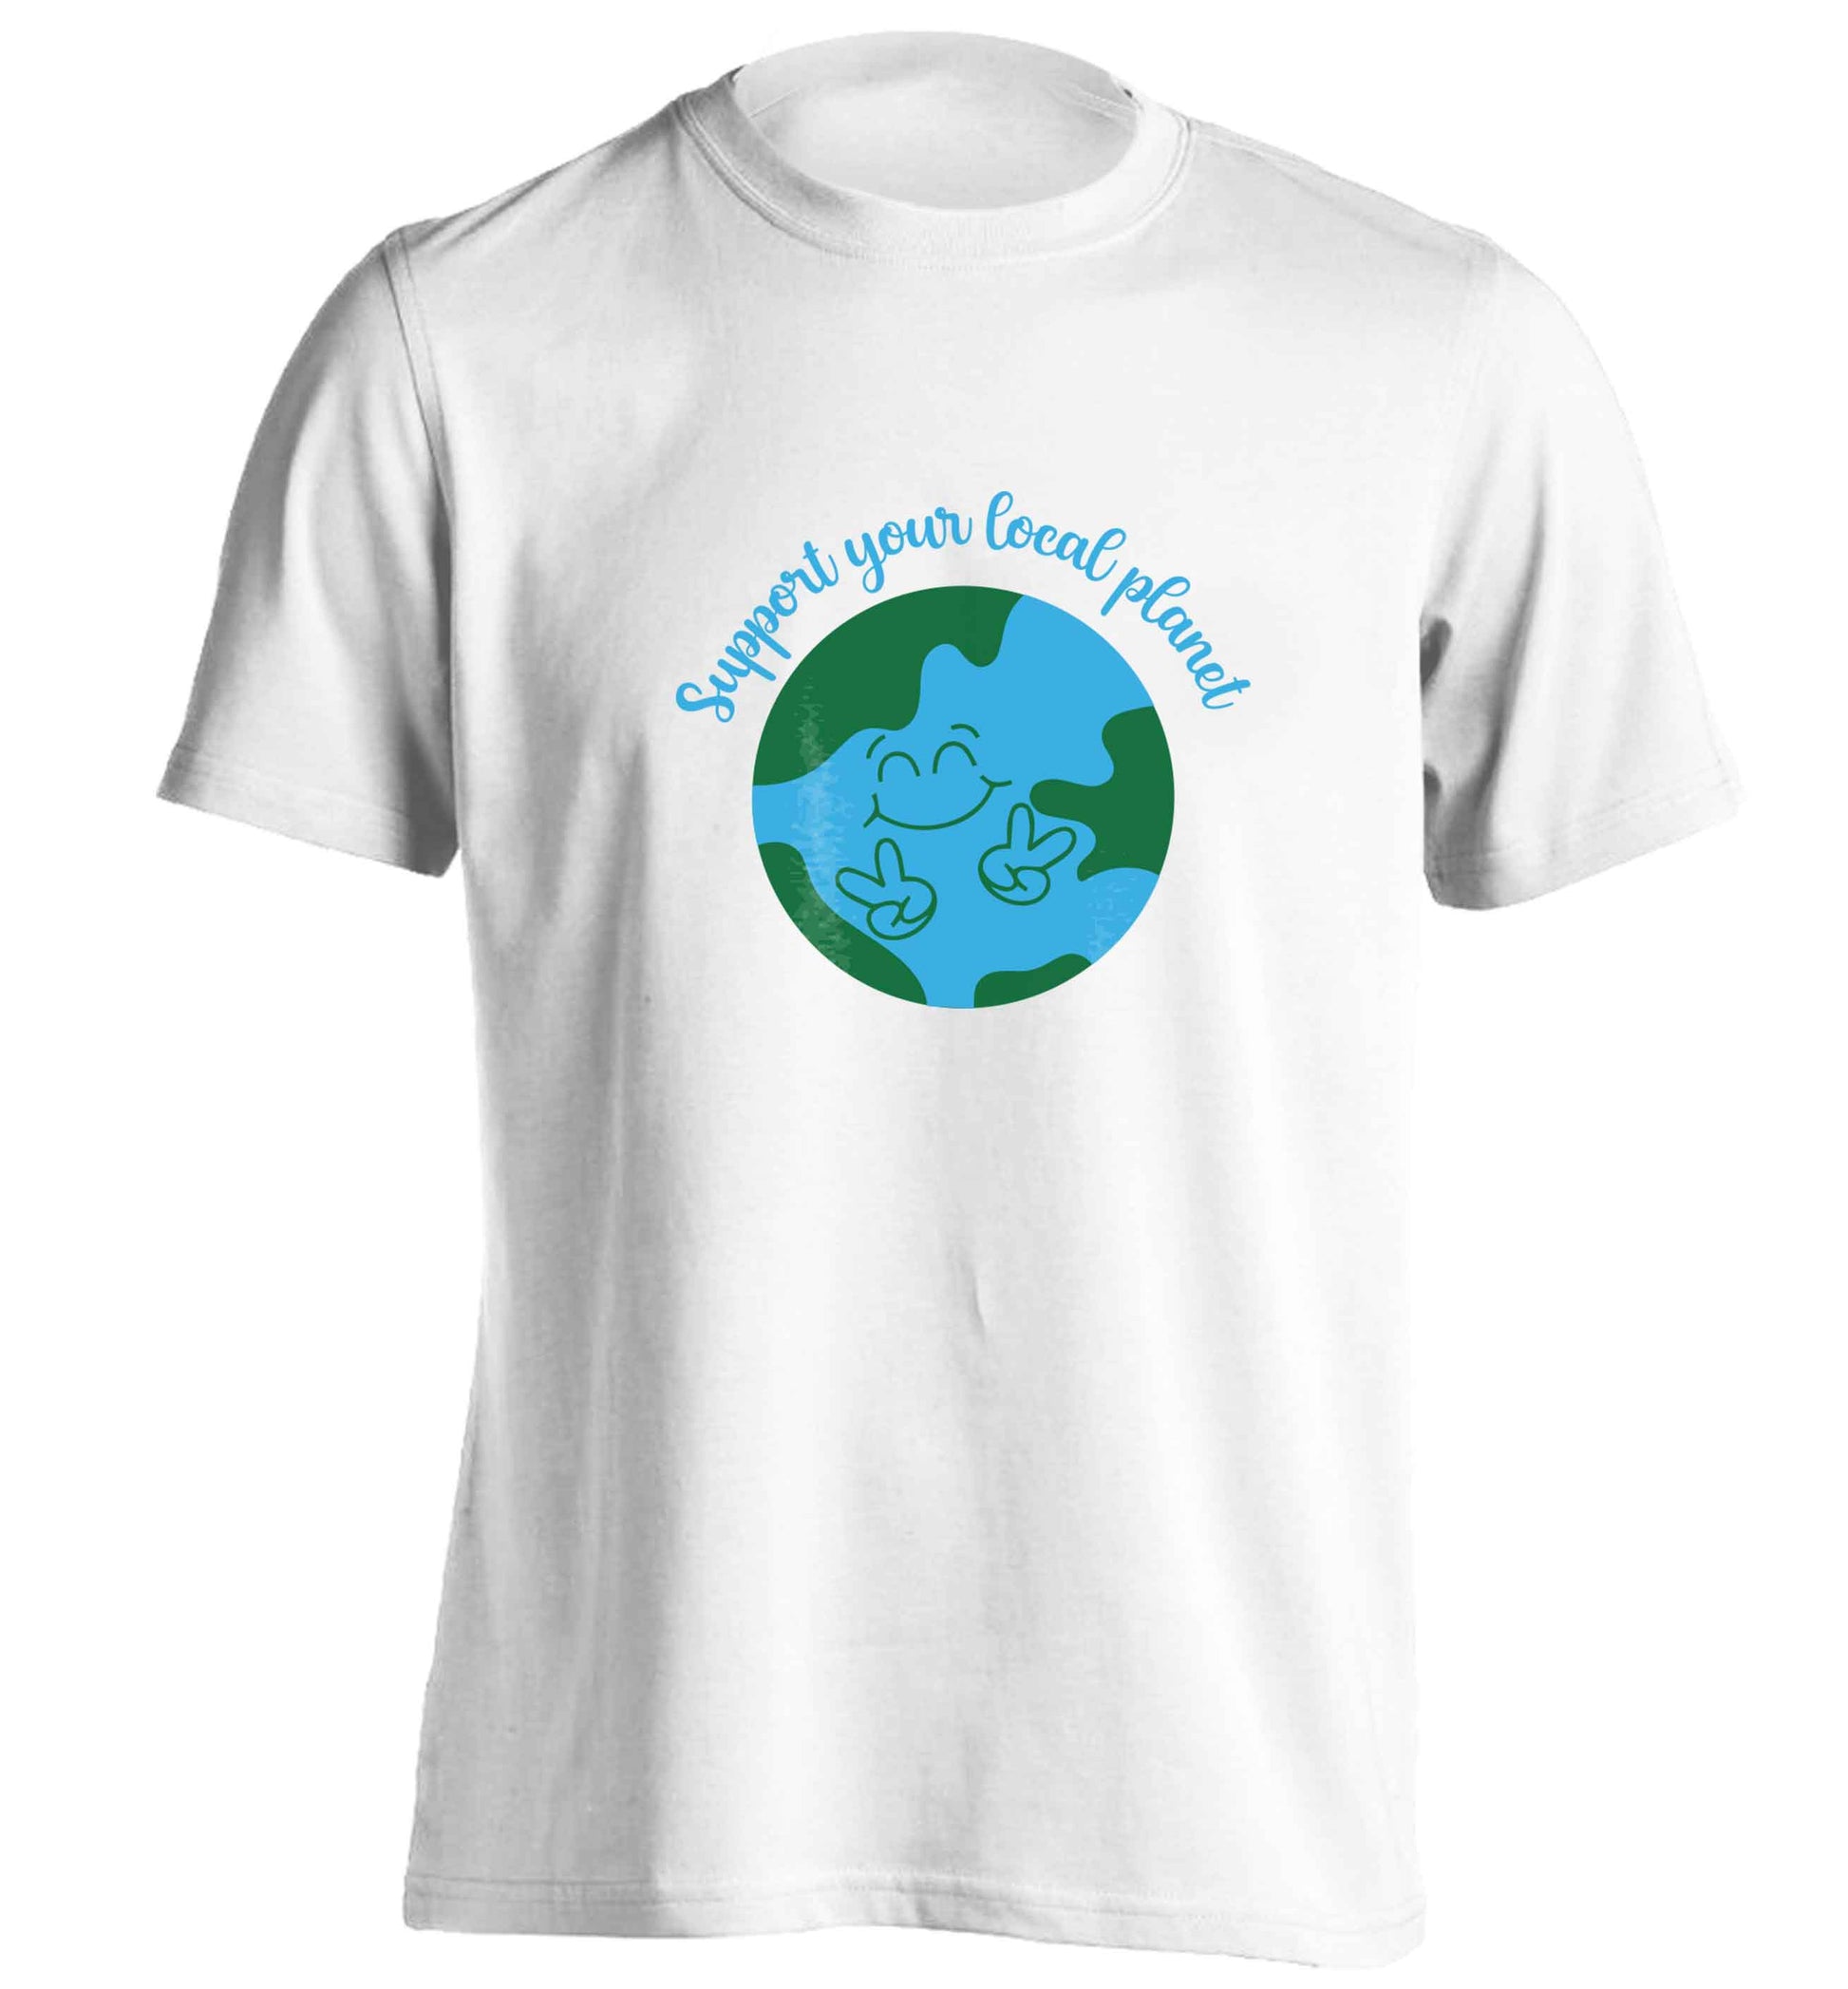 Support your local planet adults unisex white Tshirt 2XL